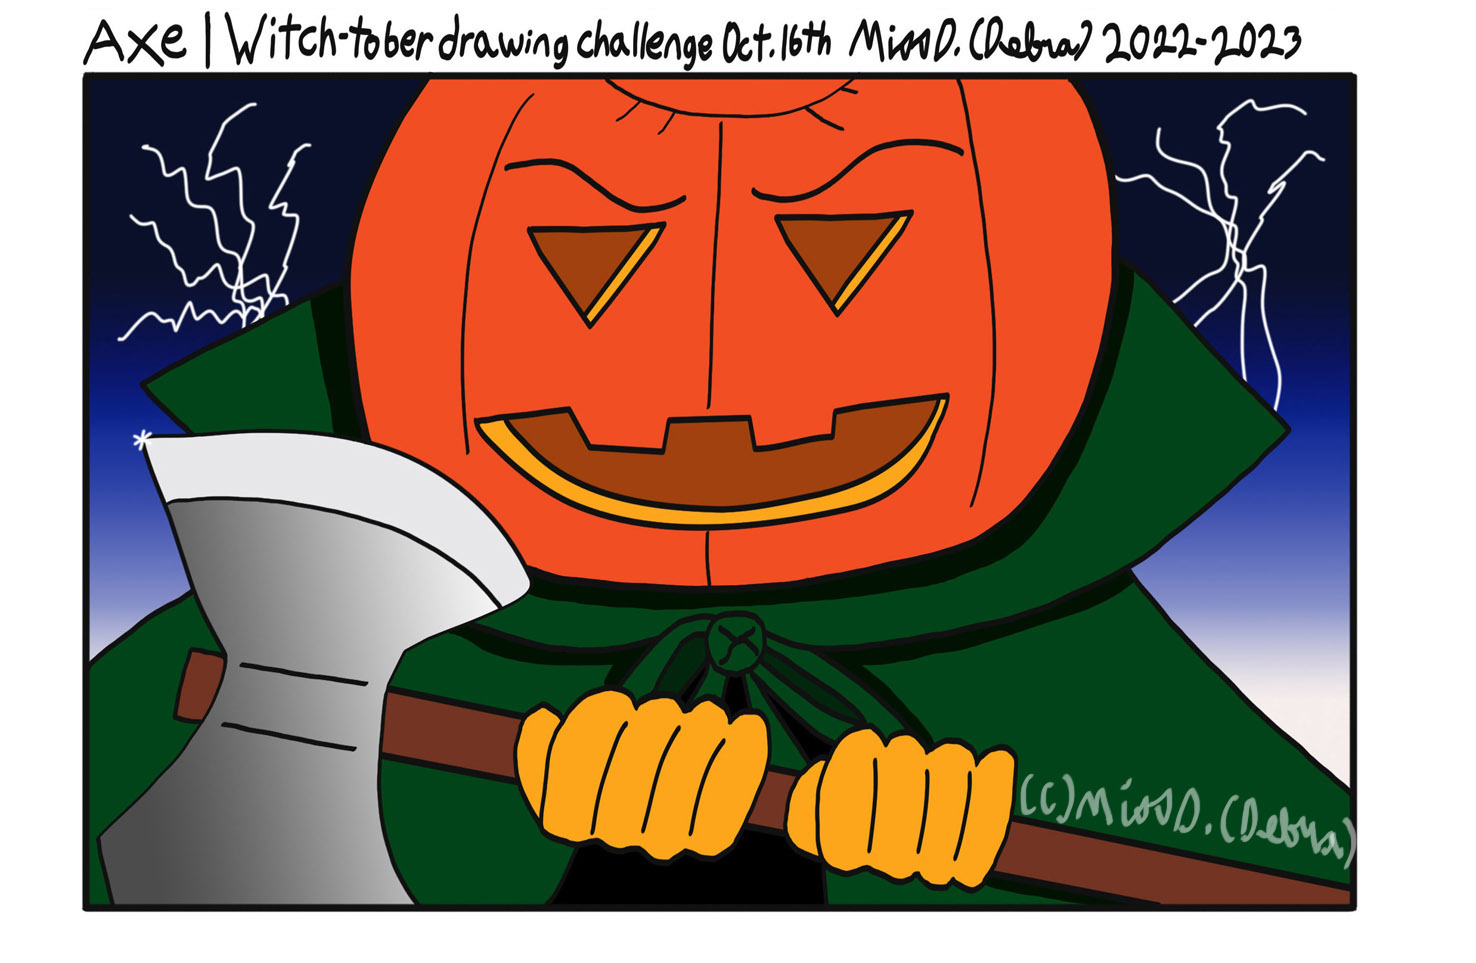 AXE - Witch-Tober Drawing Challenge Oct. 16th